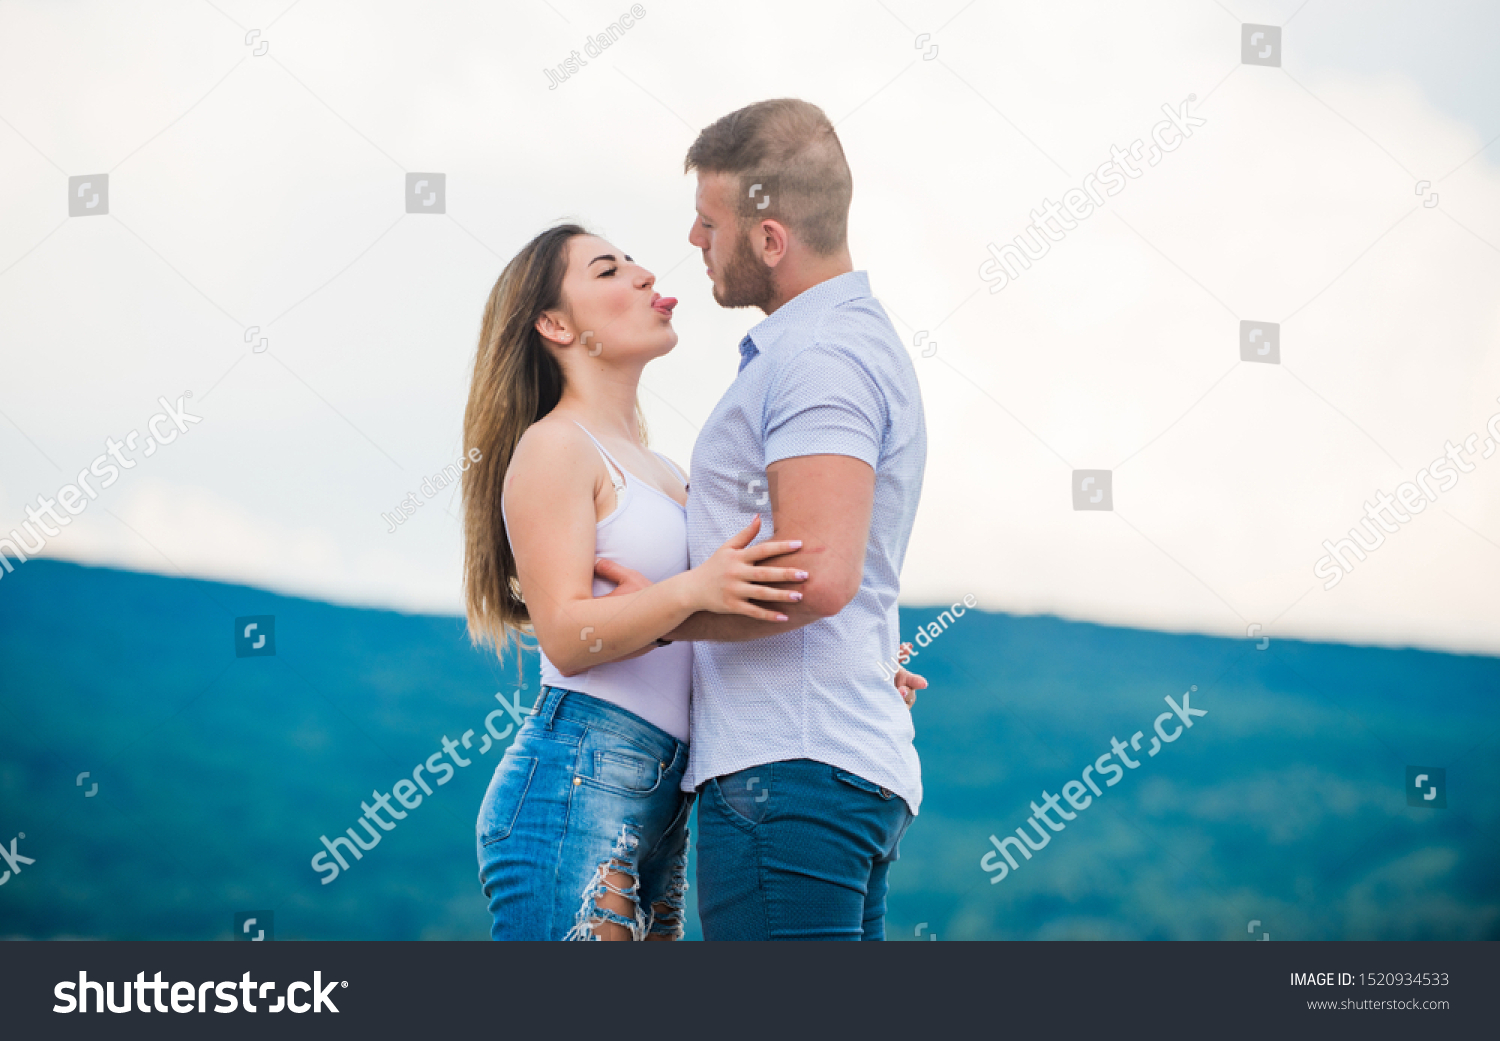 Supporting her. Together forever. Love story. Just married. Honeymoon concept. Romantic relations. True love. Family love. Couple in love. Cute relationship. Man and woman cuddle nature background. #1520934533